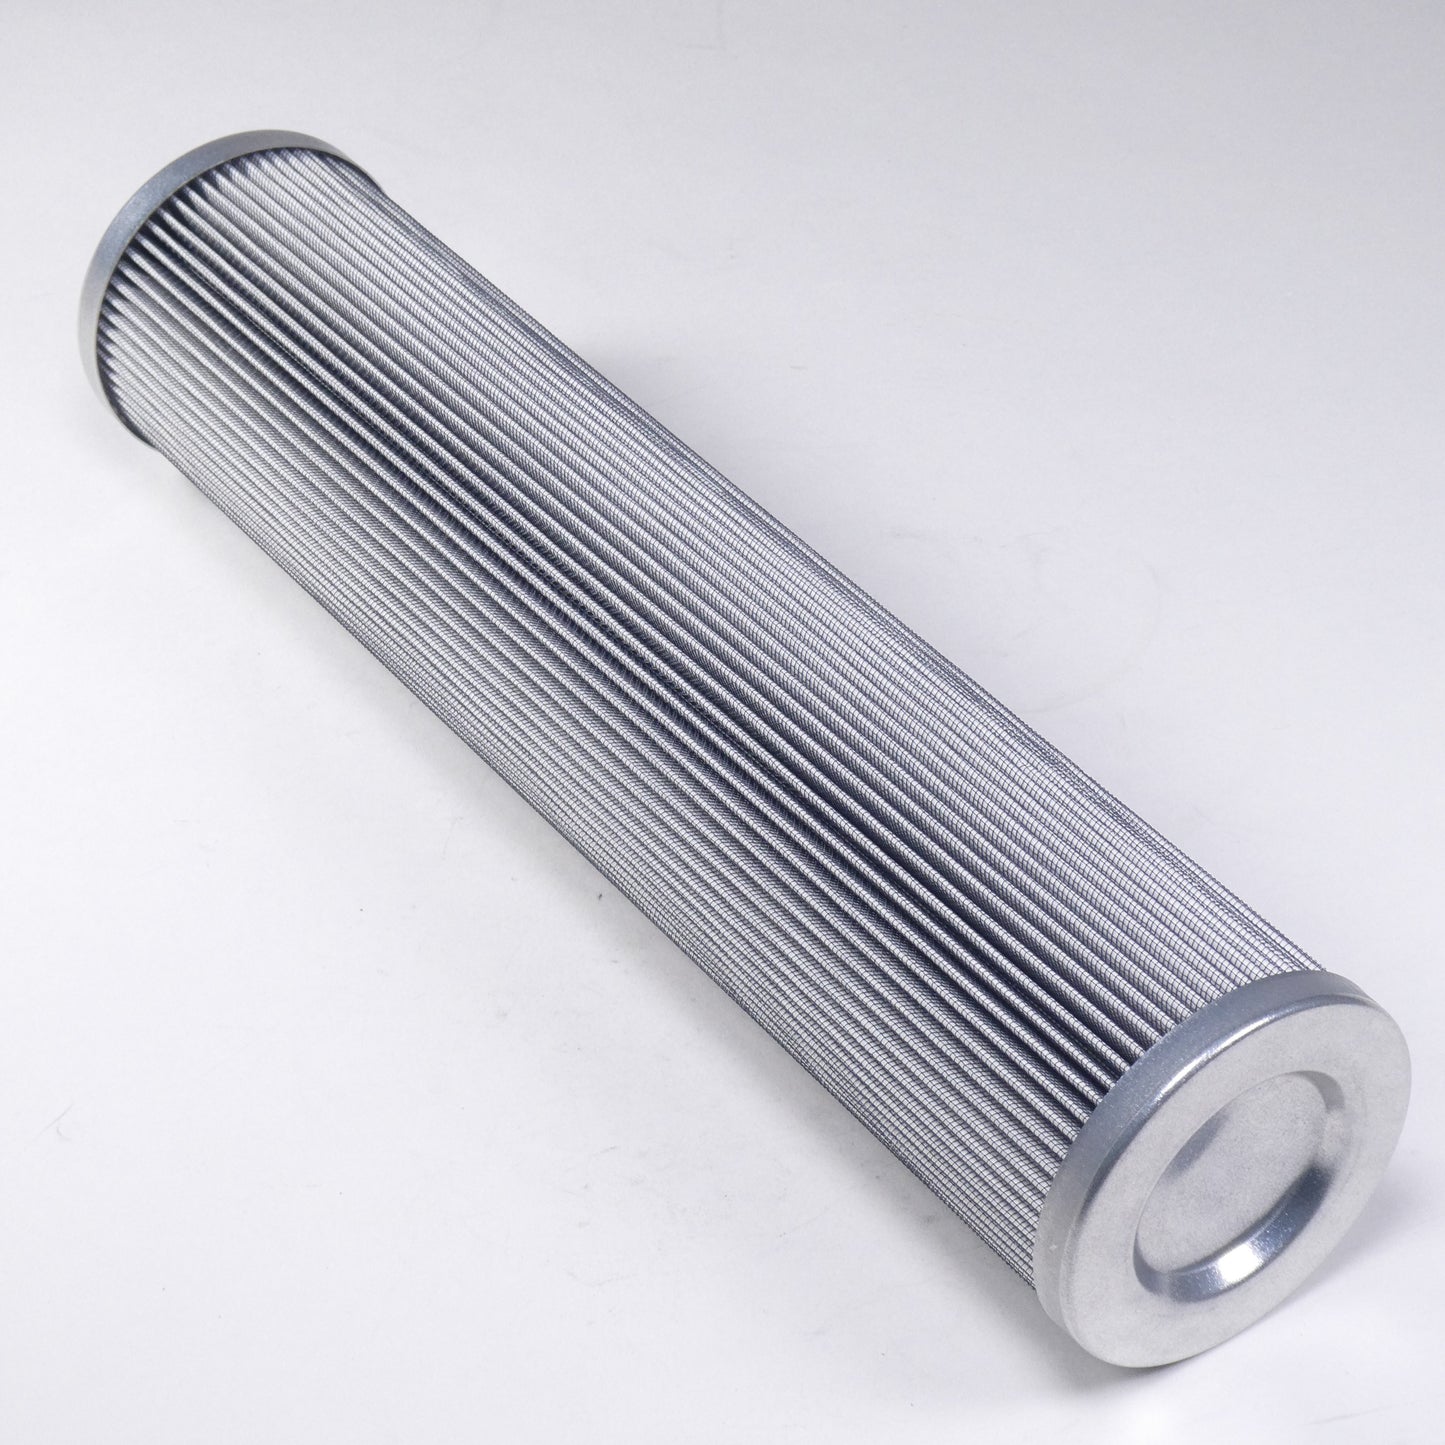 Hydrafil Replacement Filter Element for Filtersoft M68939MCBL